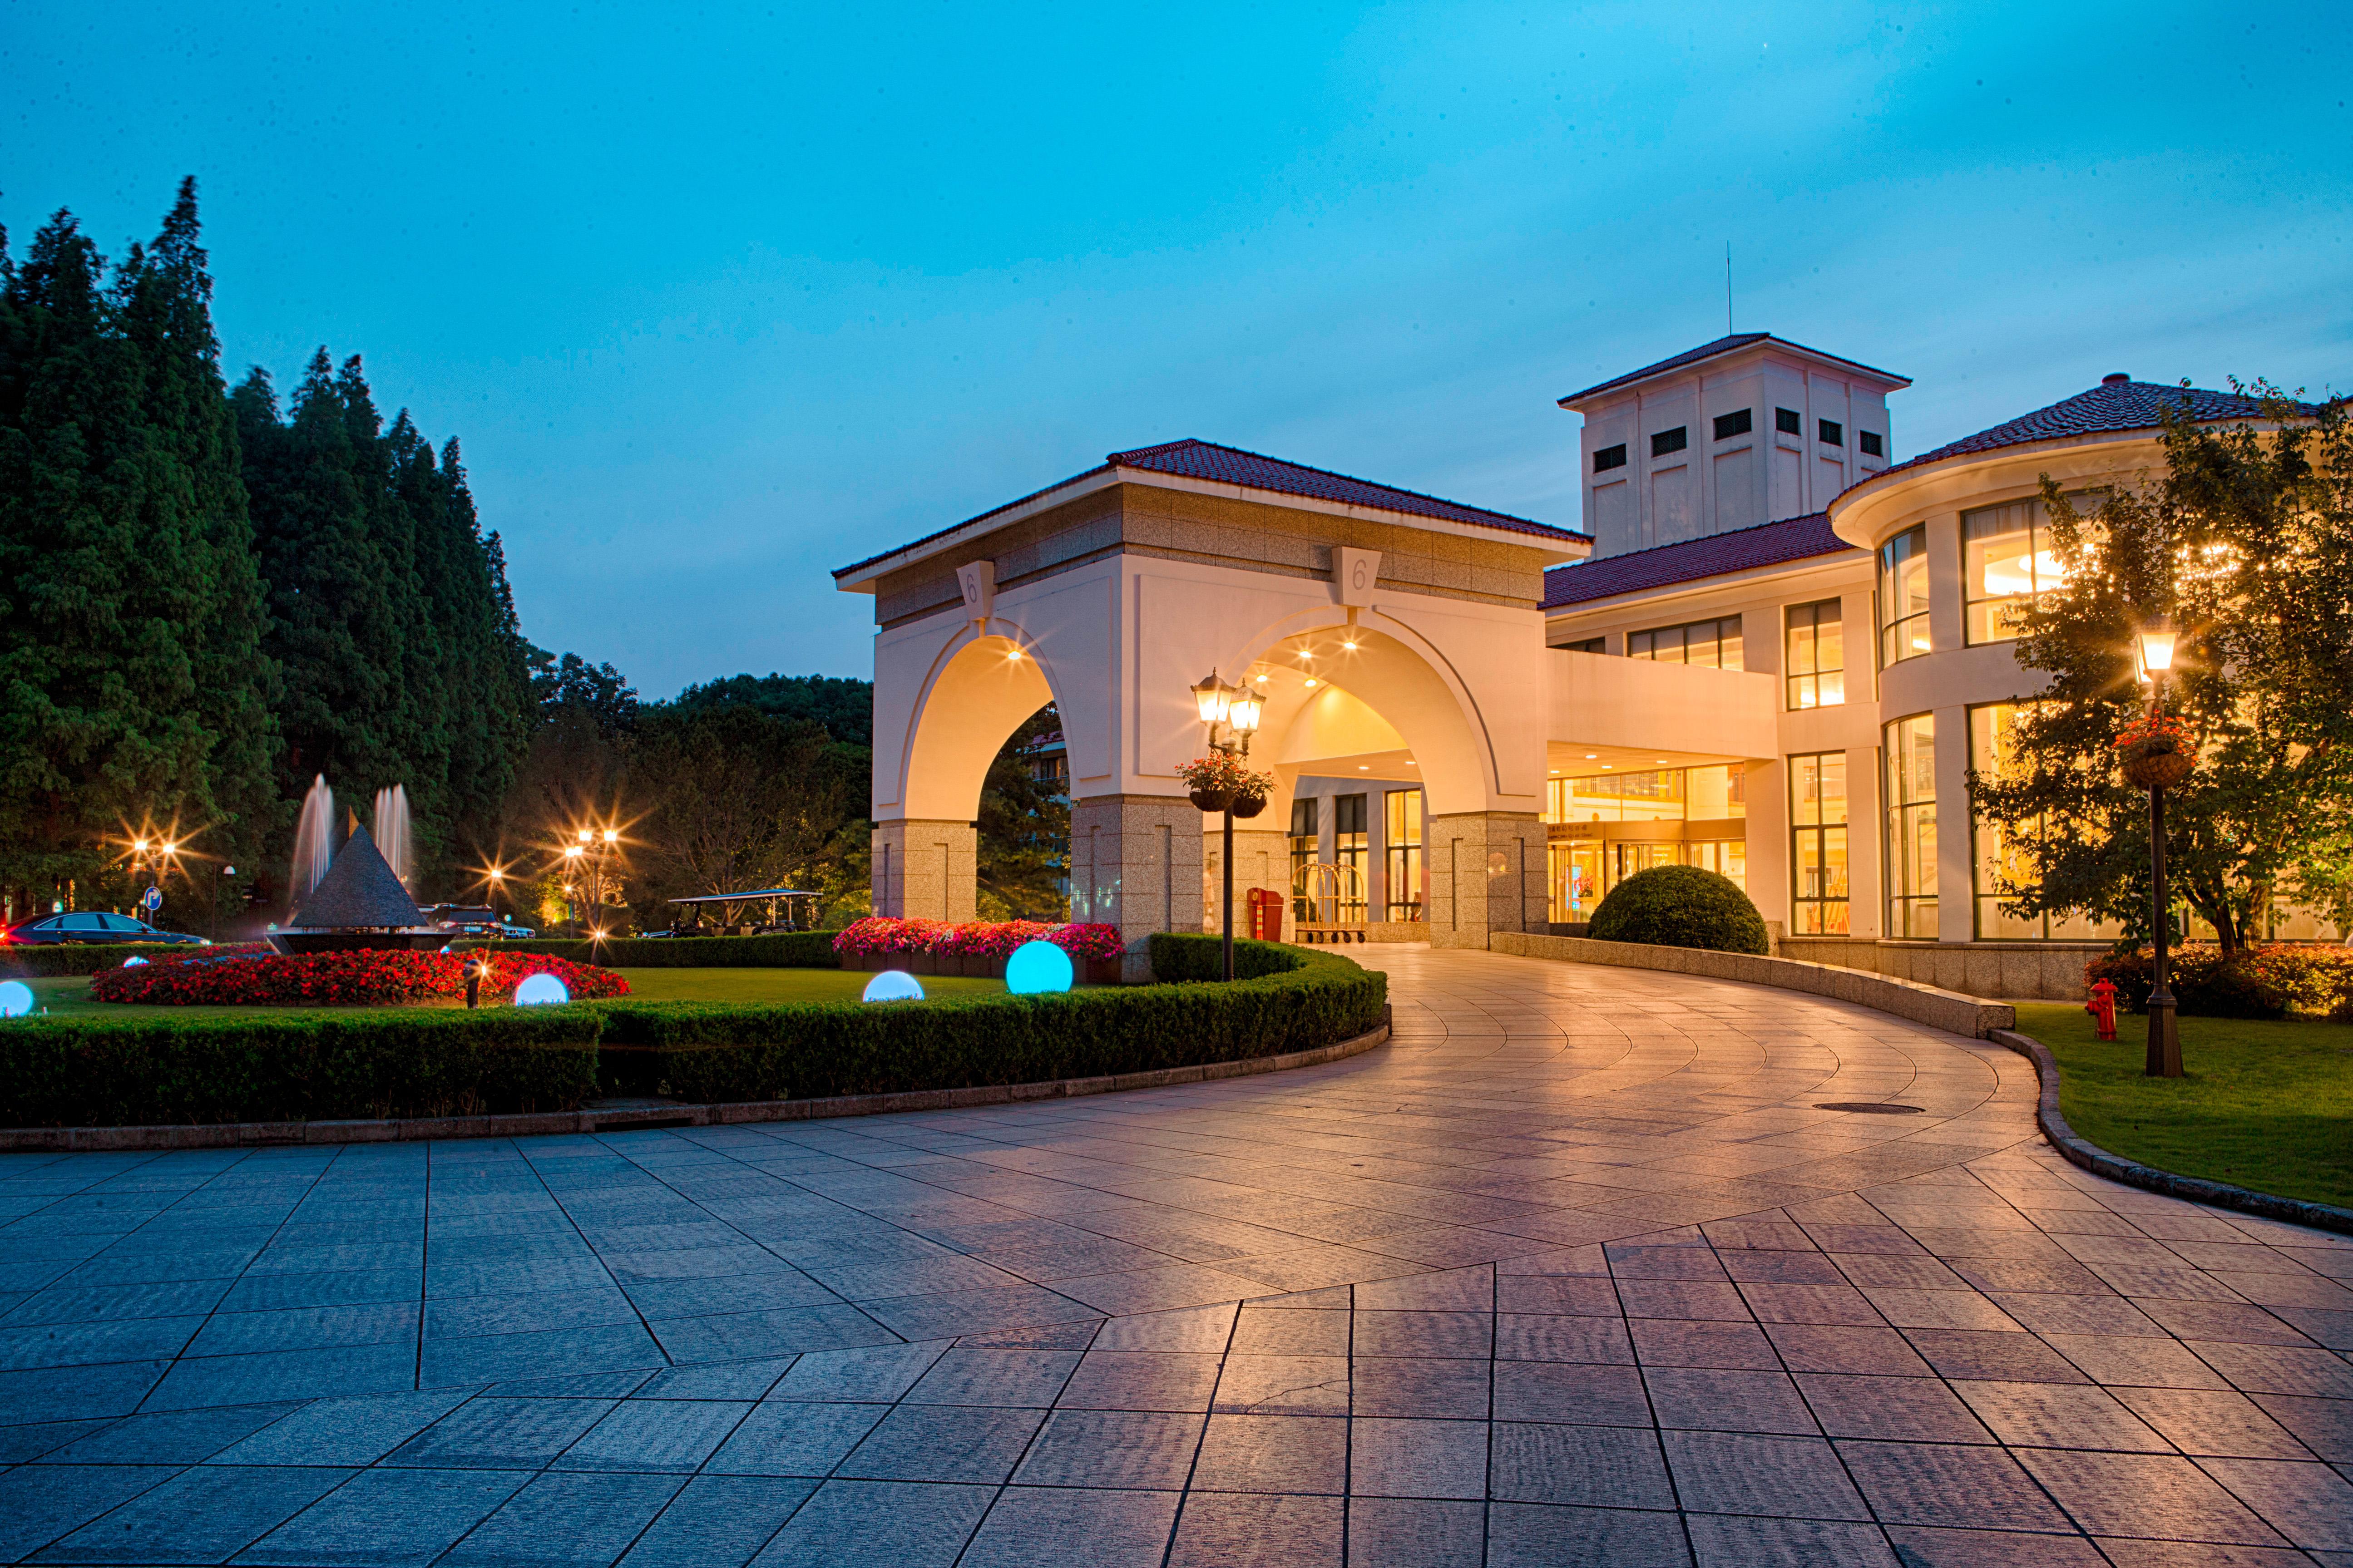 Hong Qiao State Guest House Shanghai Exterior photo